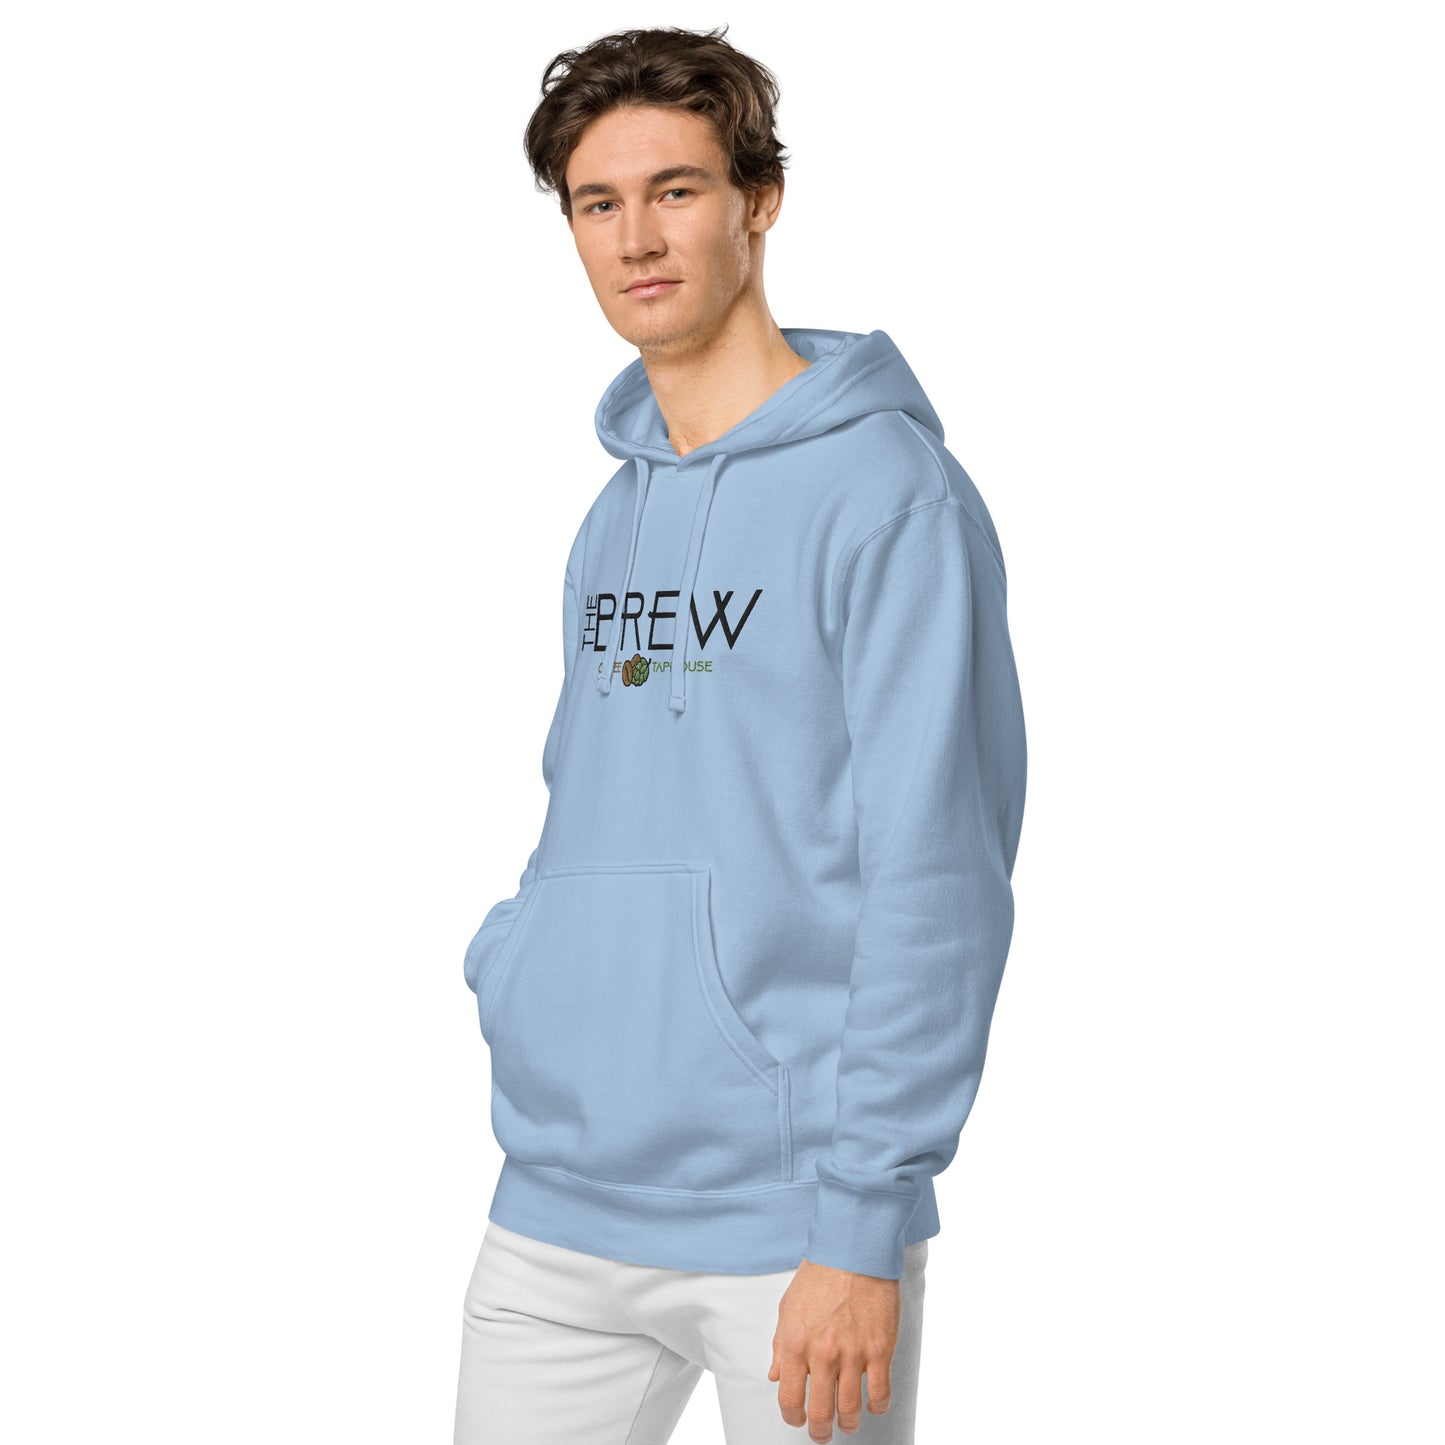 Brew Logo Embroidered Heavyweight Hoodie